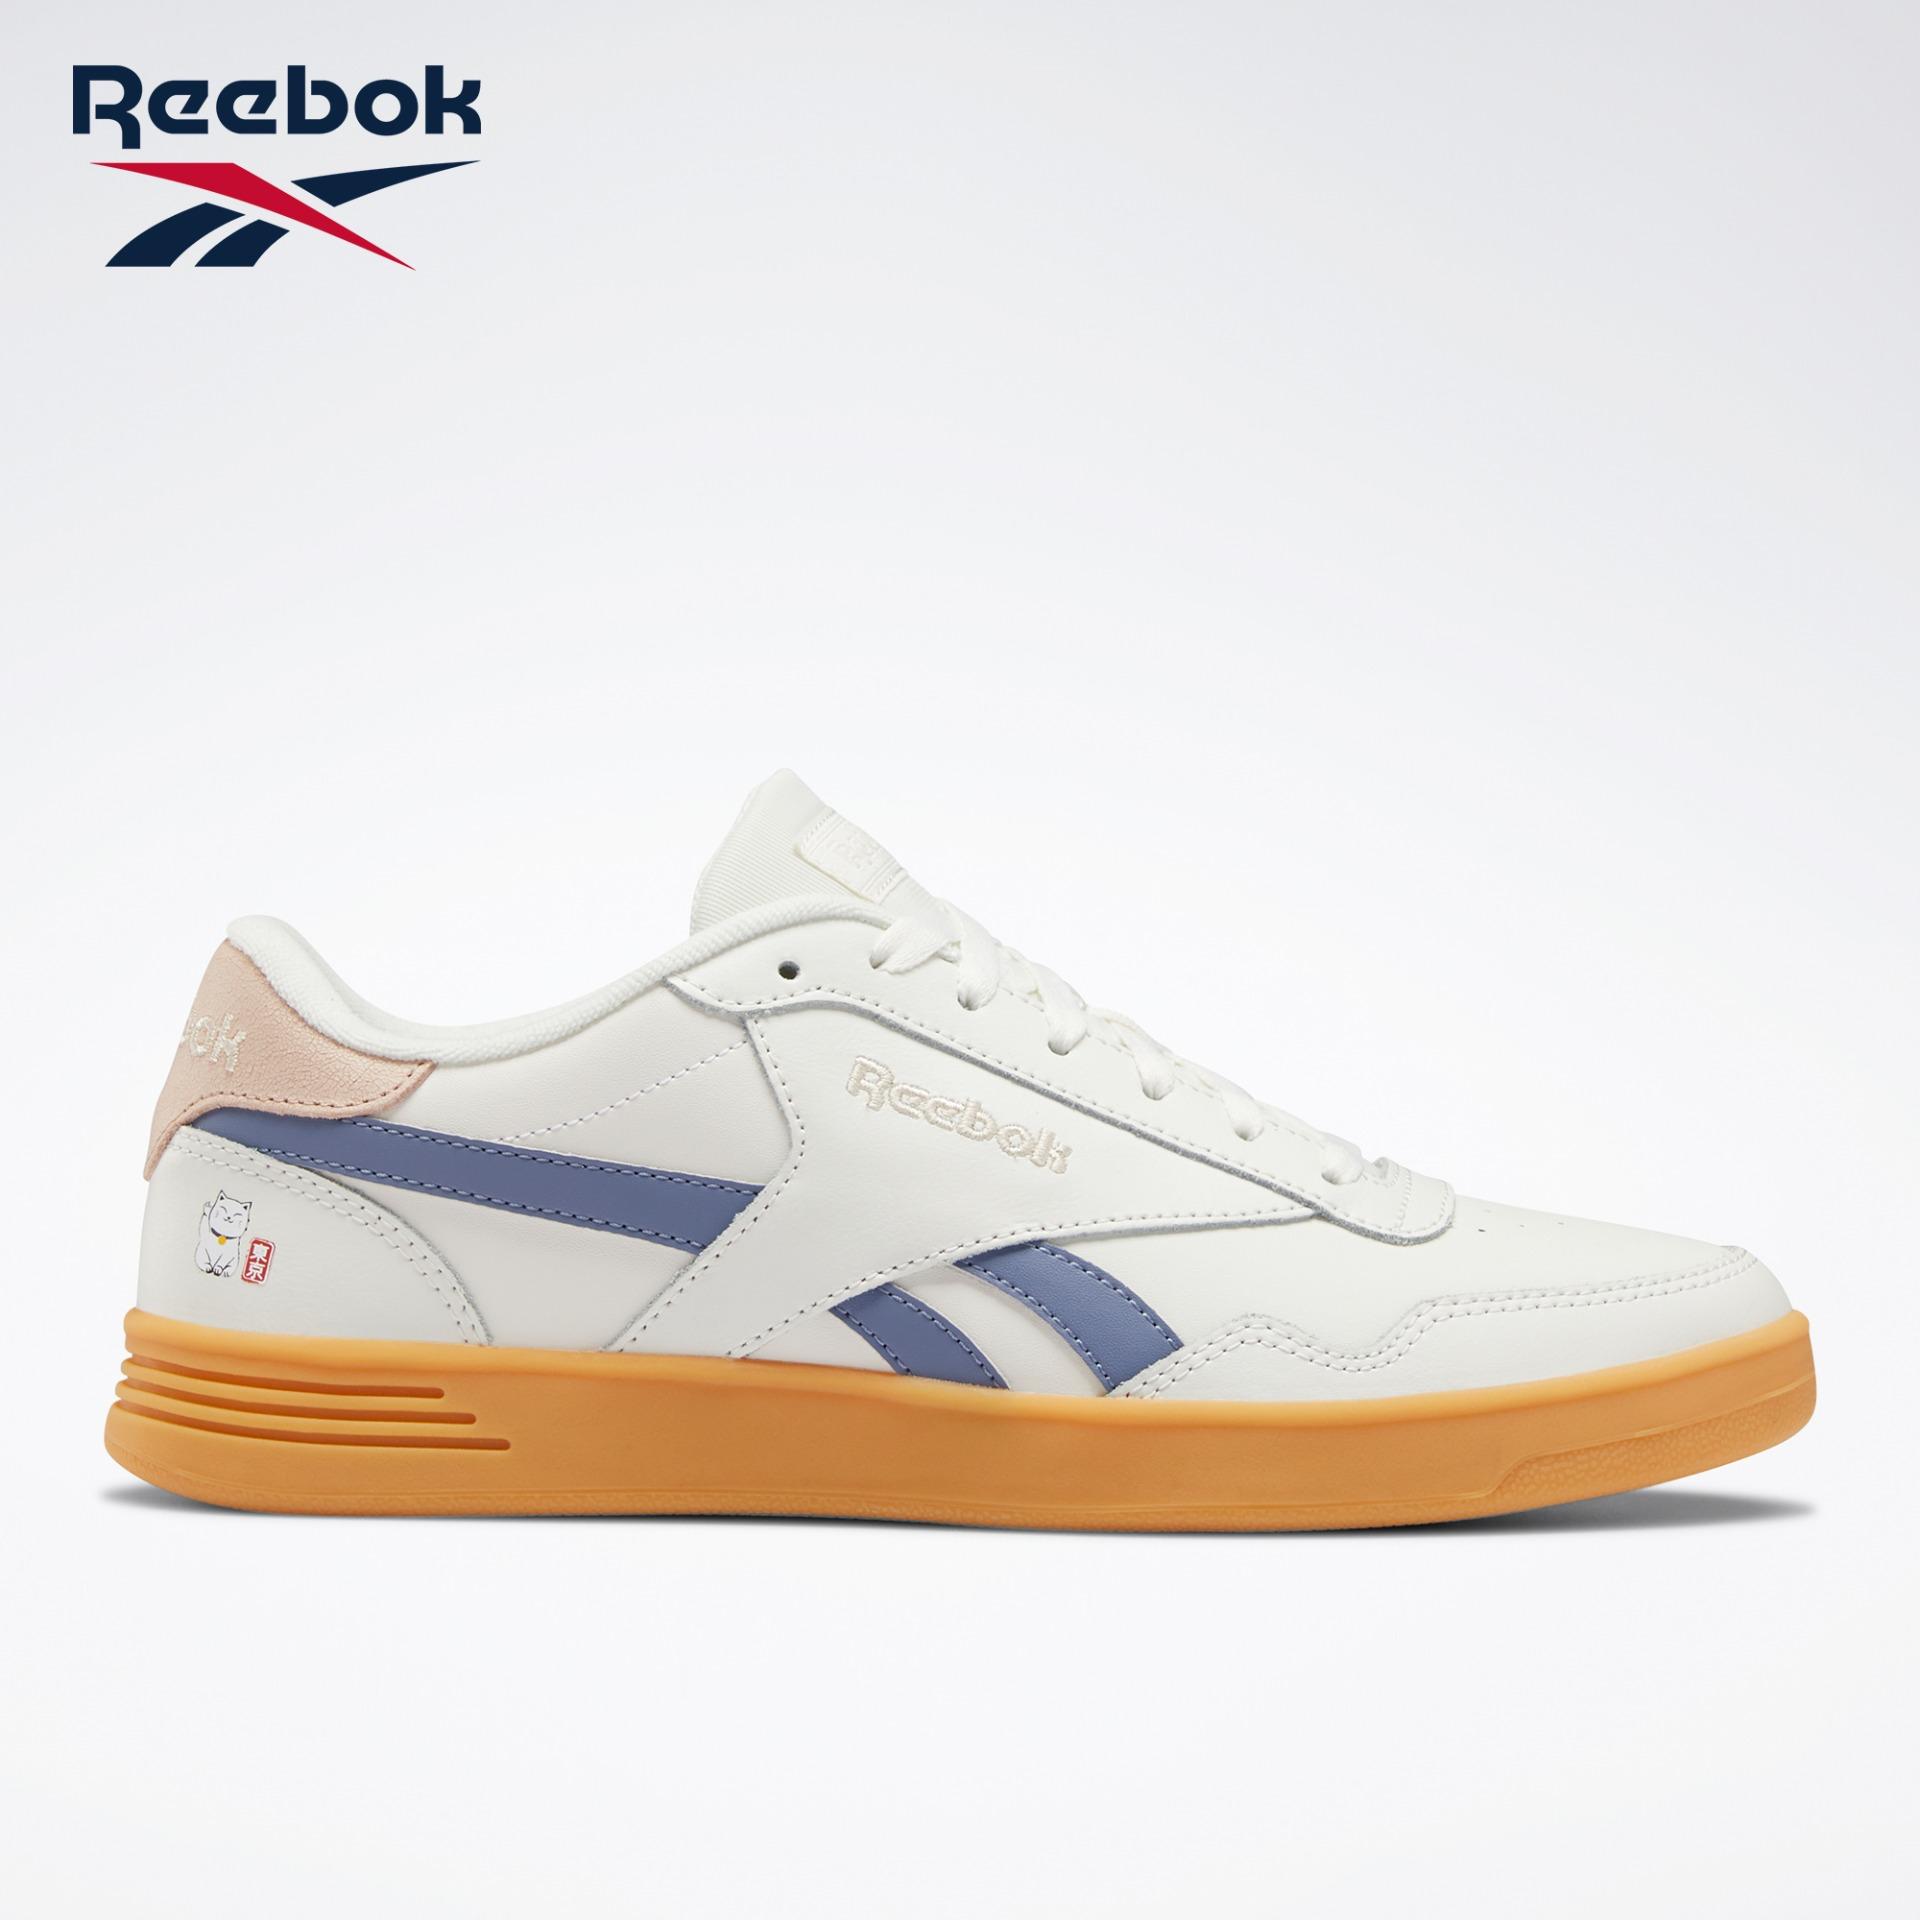 reebok shoes models with price philippines